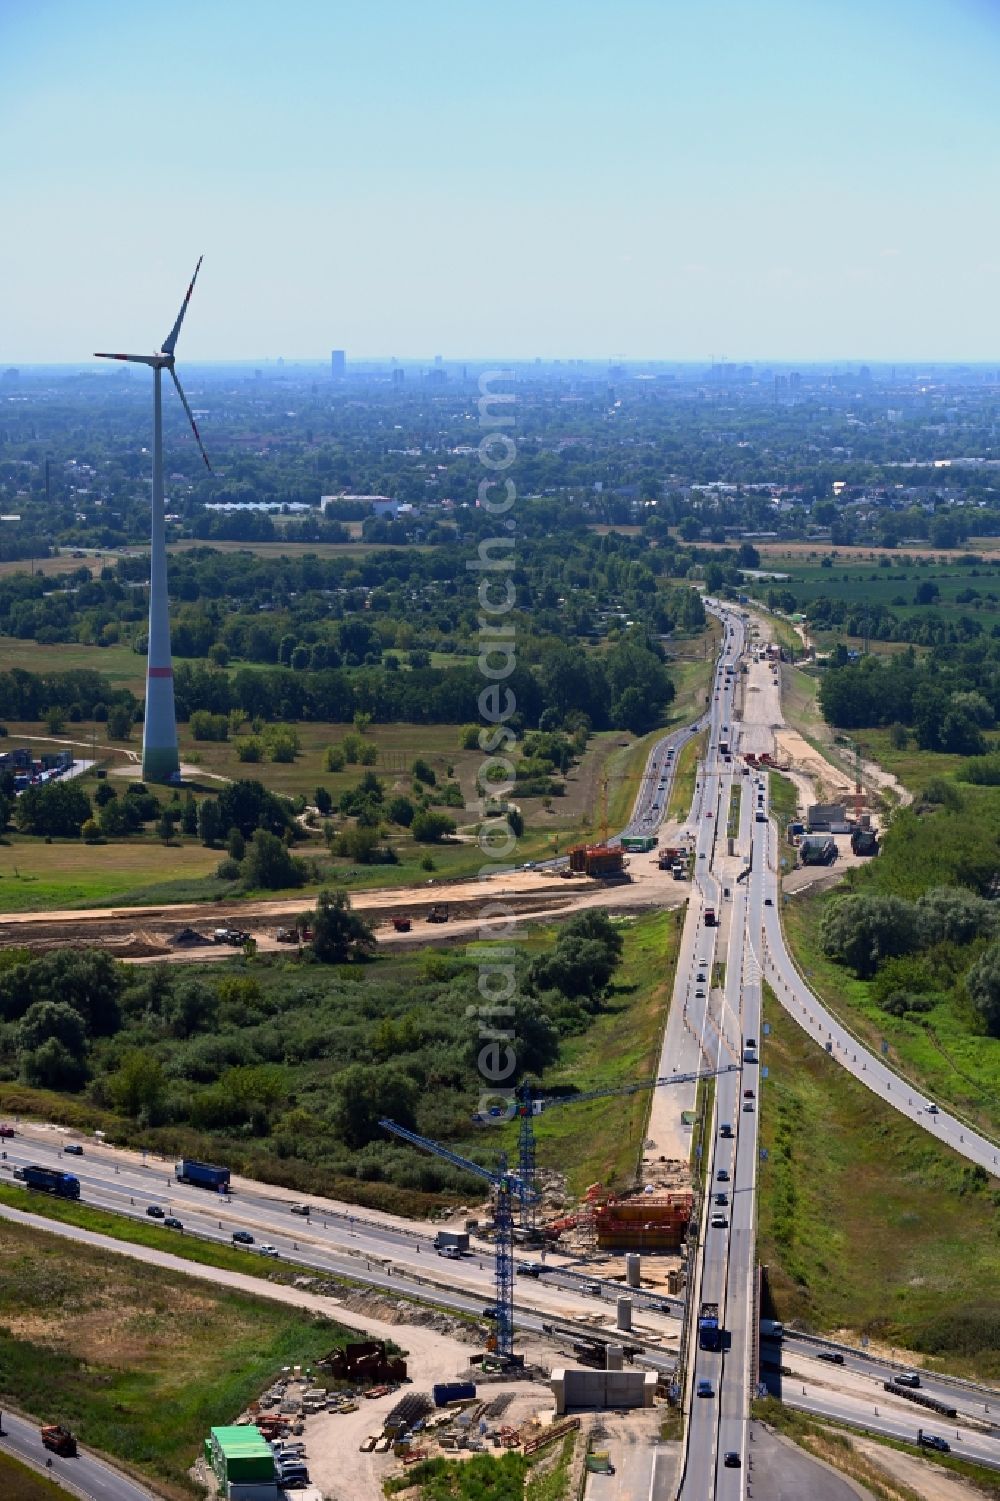 Aerial image Schönerlinde - Construction to extend the traffic flow at the intersection- motorway A 114 - A10 - Dreieck Pankow in Schoenerlinde in the state Brandenburg, Germany